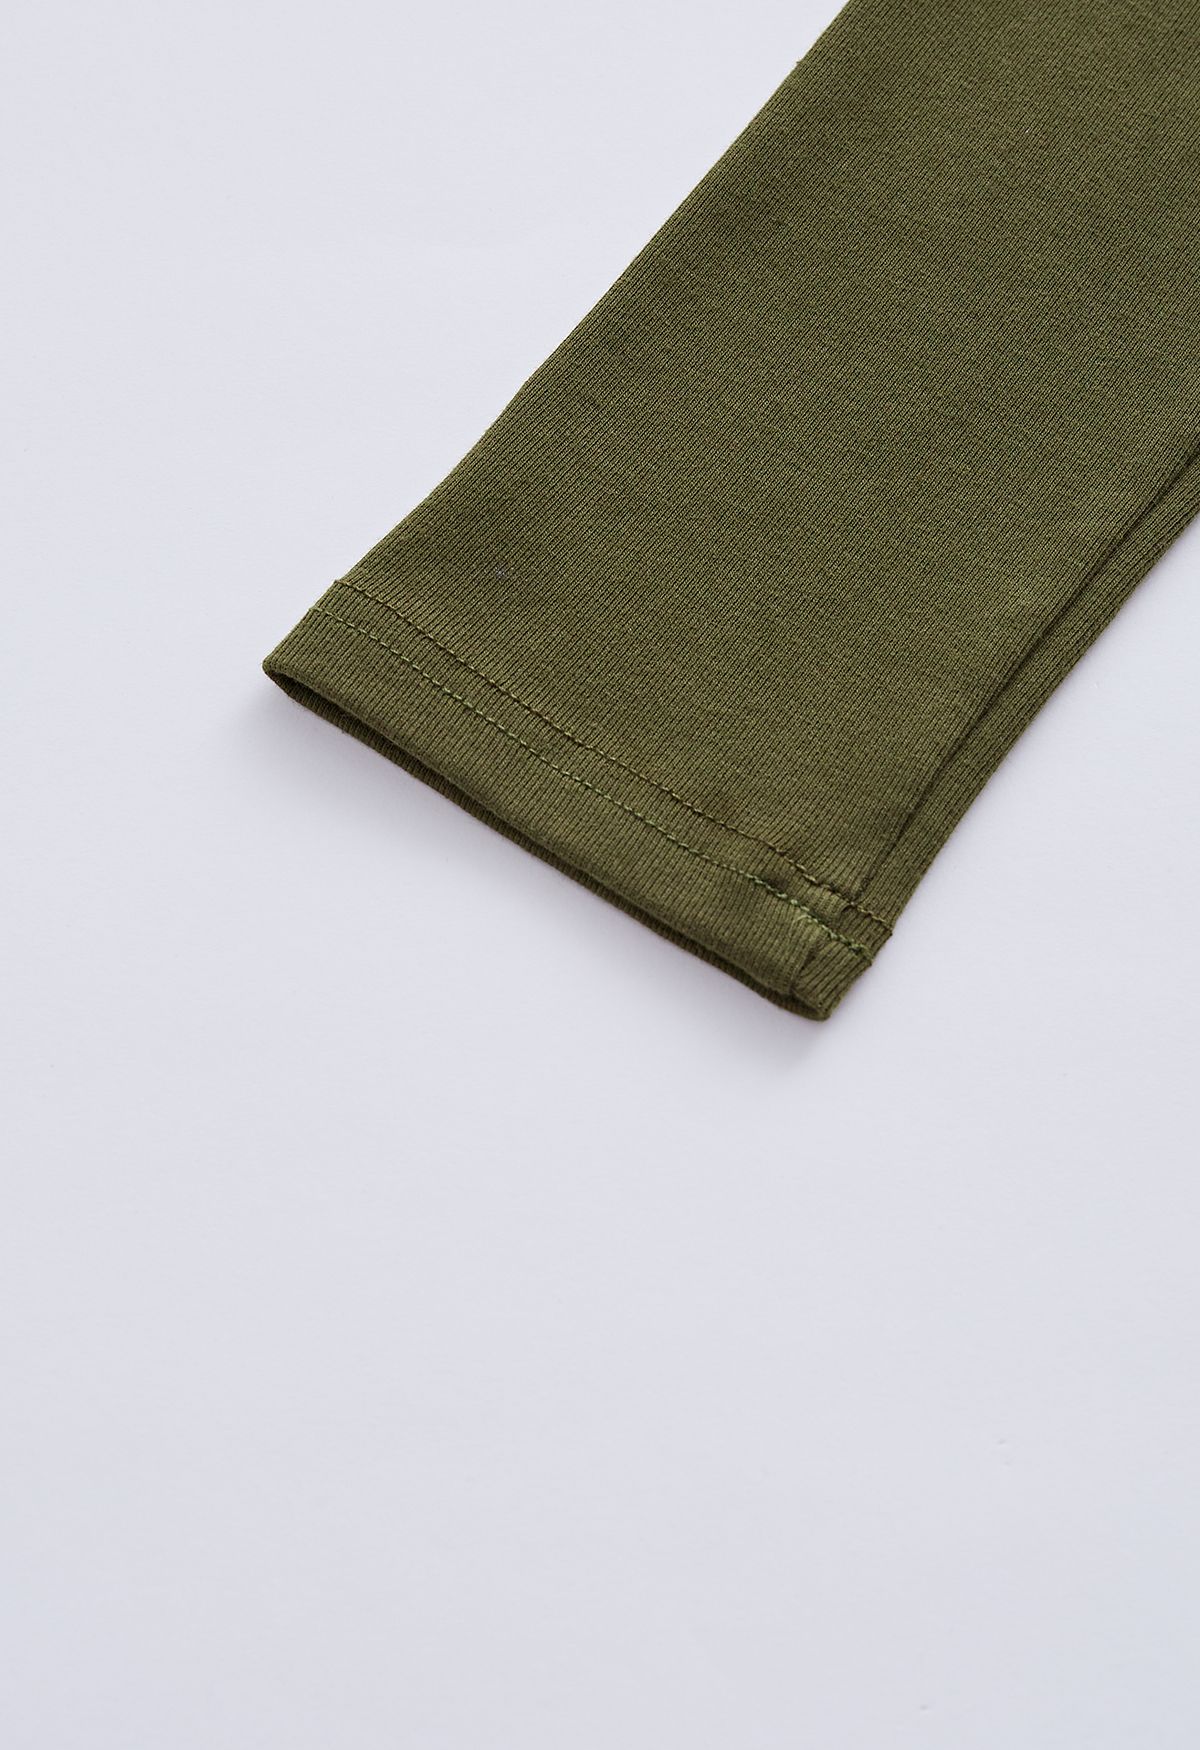 Crisscross Faux-Wrap Soft Cotton Top in Army Green